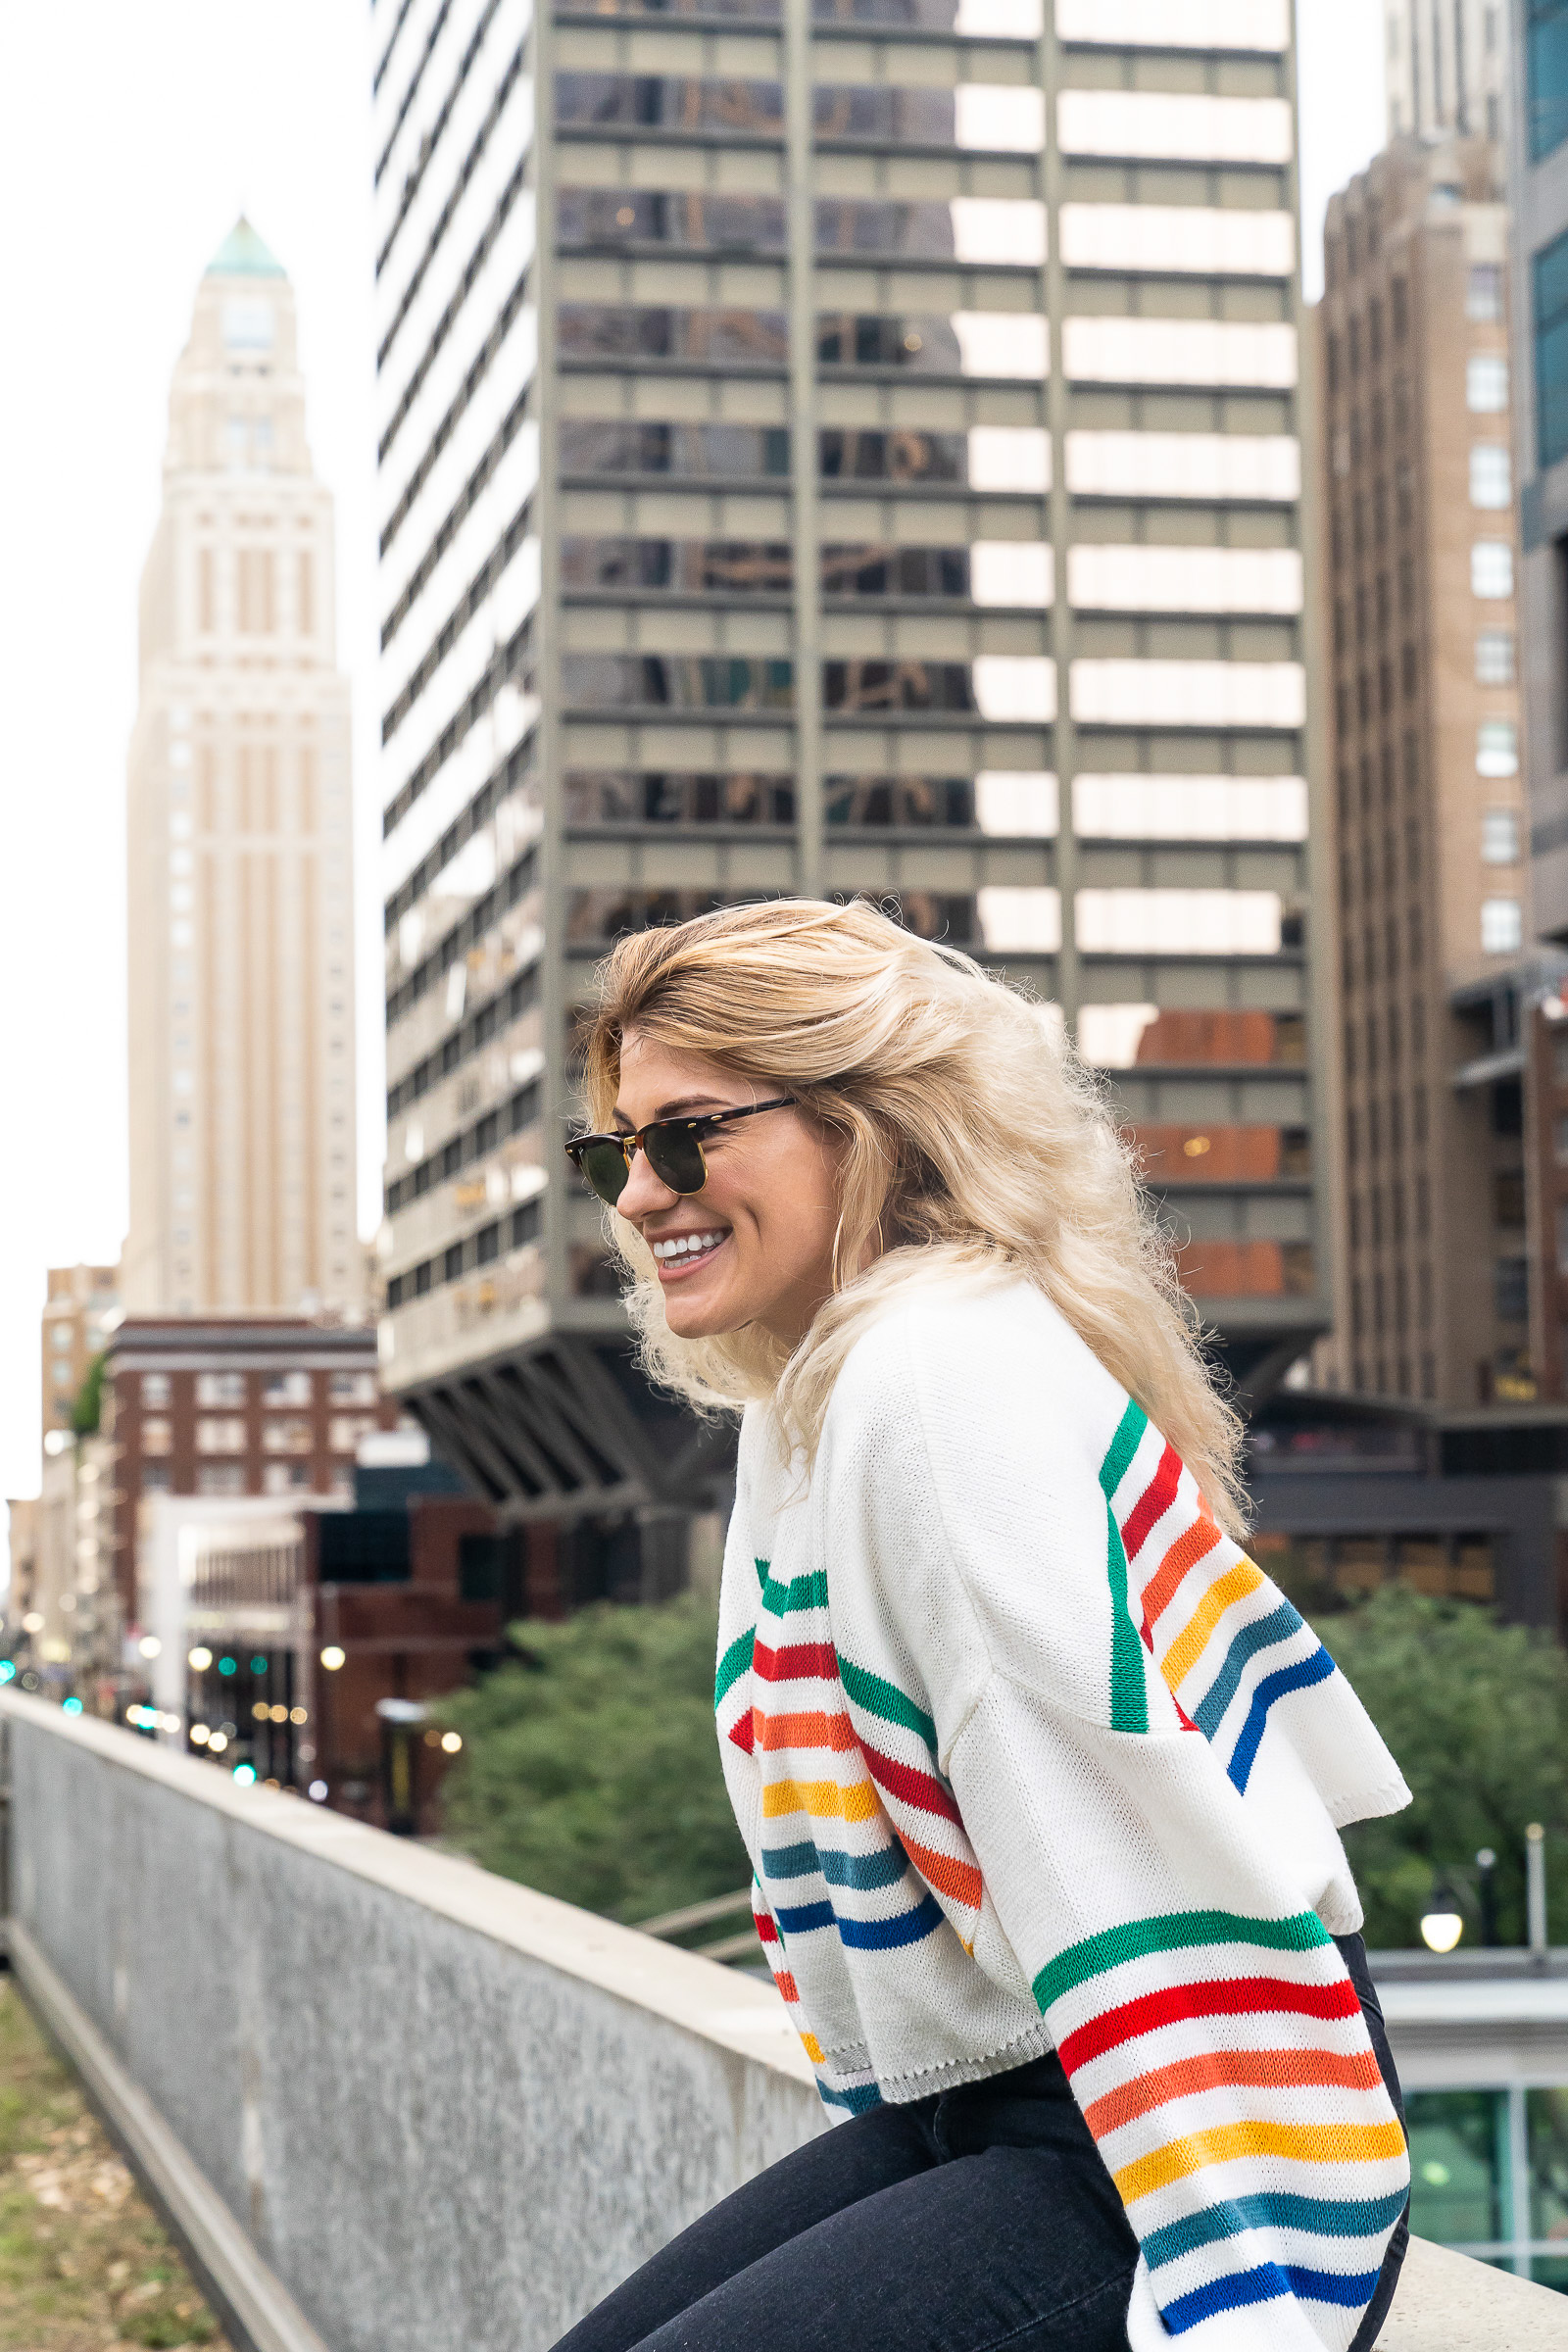 City Shoot in a Rainbow Sweater. | Ashley from LSR